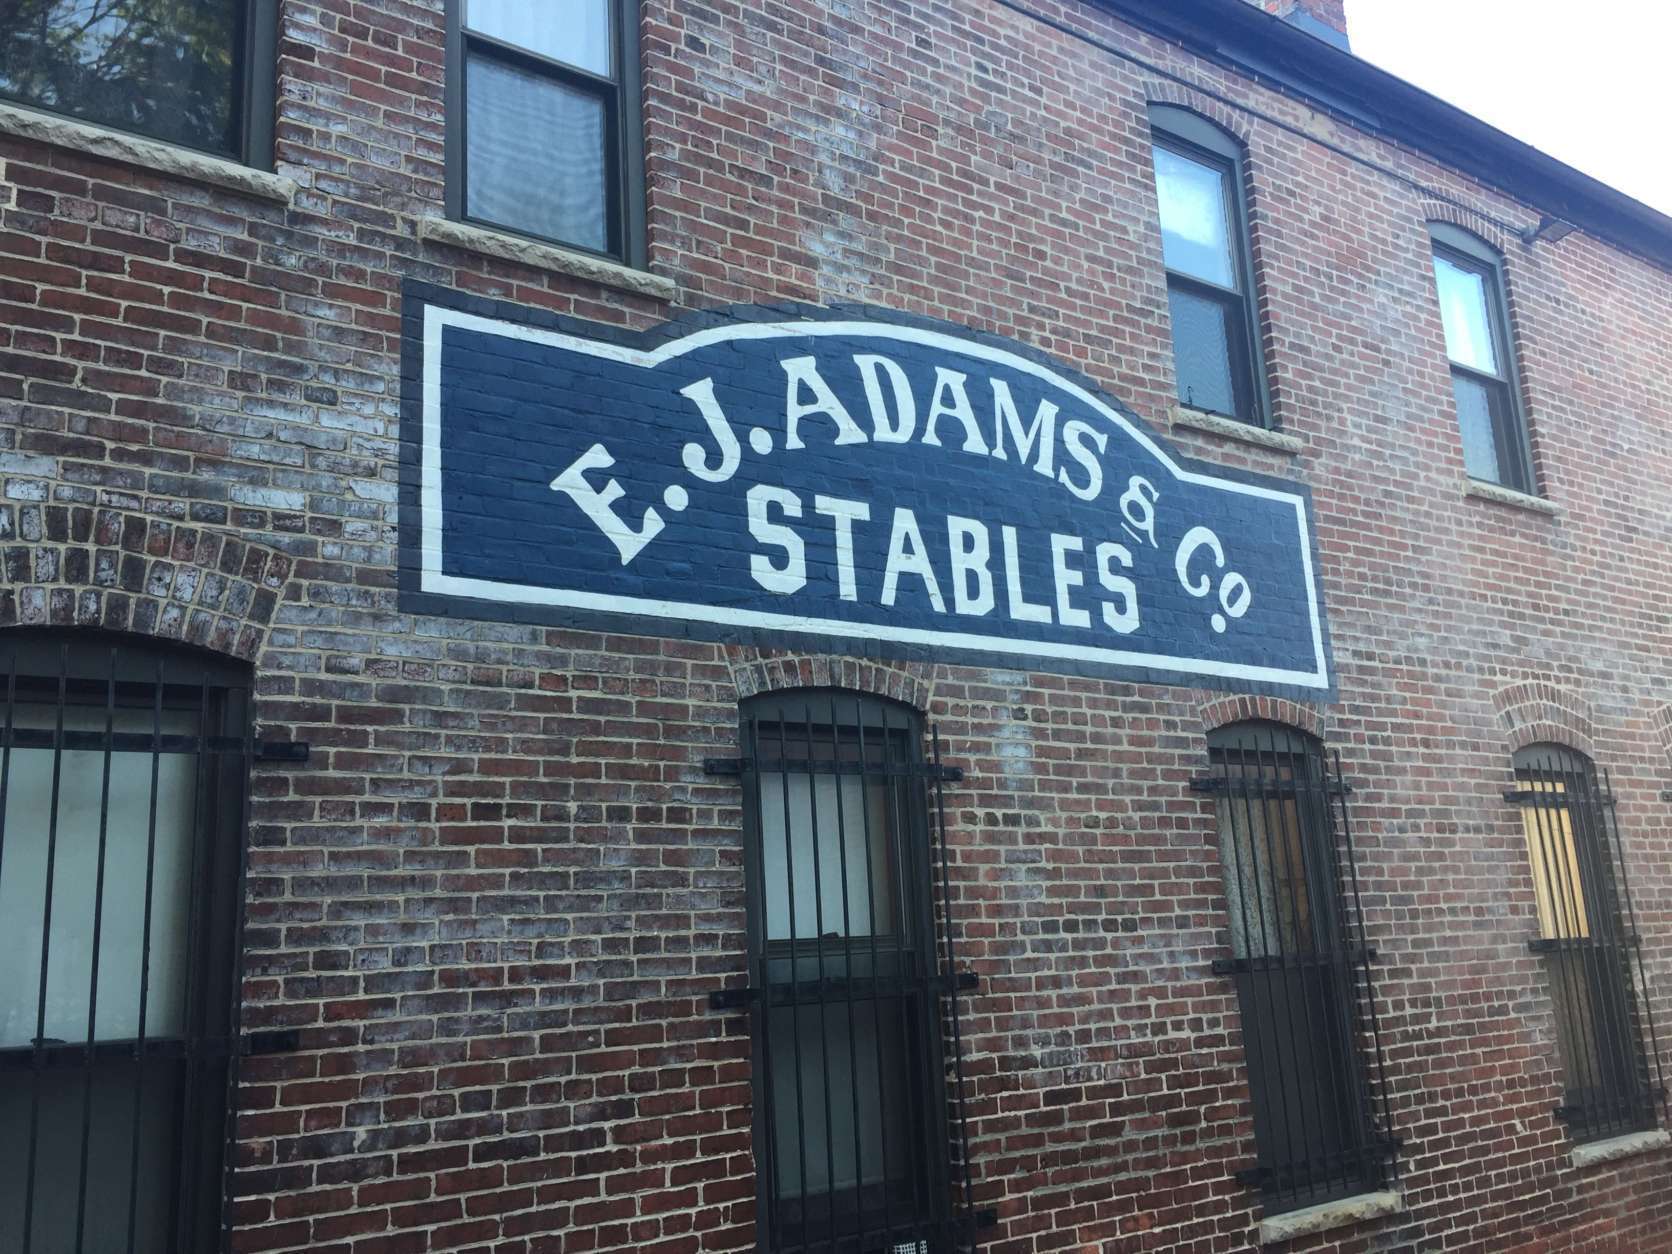 Down the alley, at 1315 Naylor Court NW, another restored sign overlooks an alley. (WTOP/Jack Pointer)